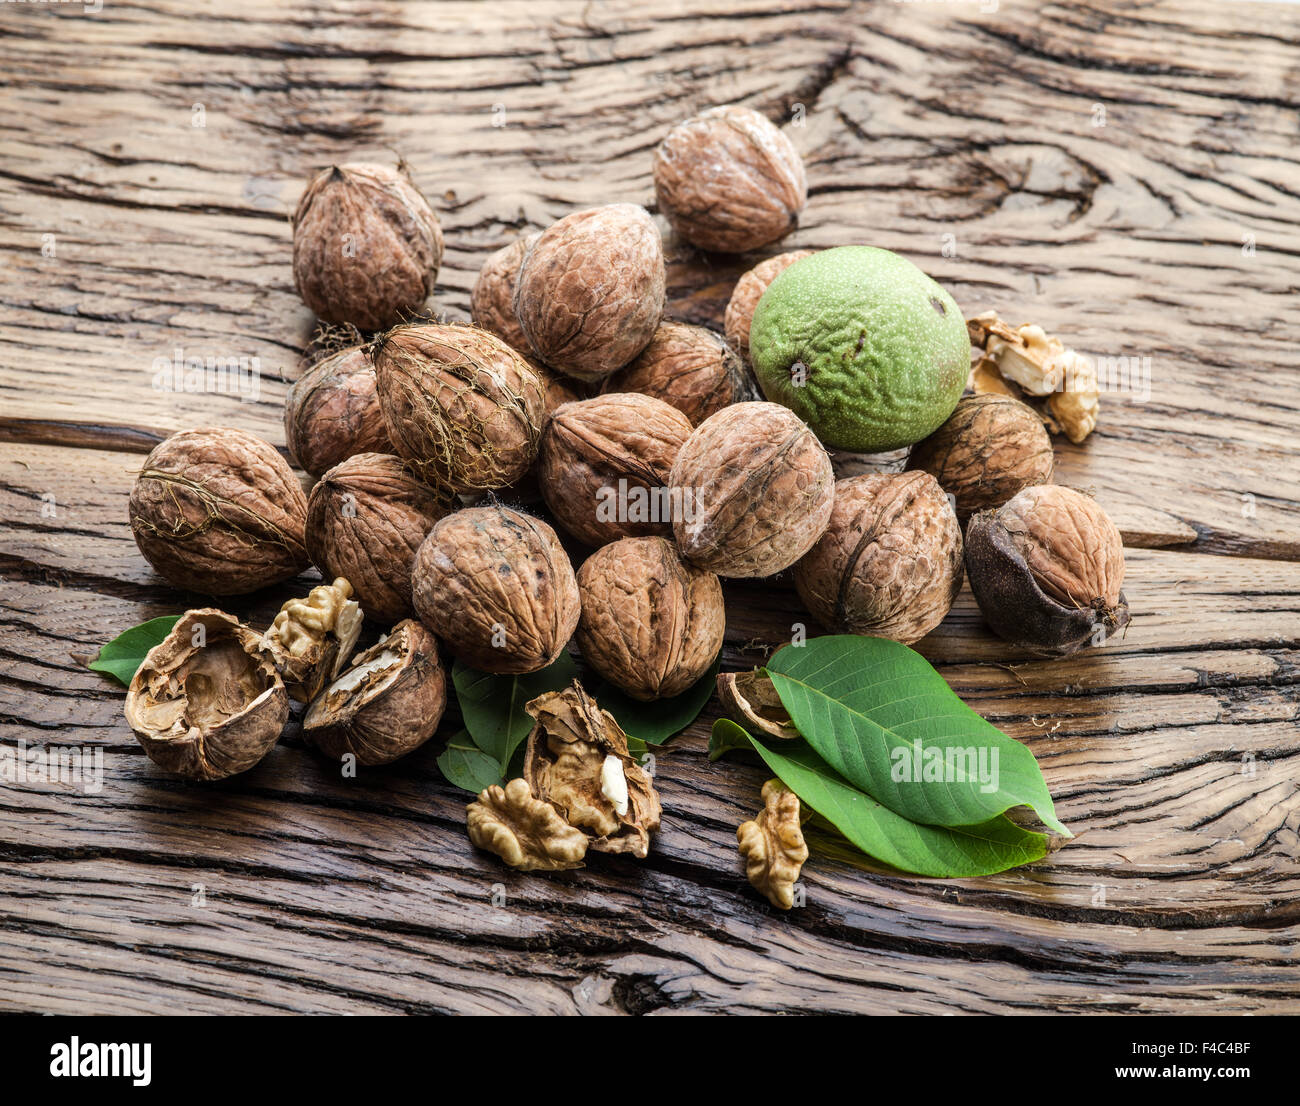 Walnuts in the wooden table. The autumn harvest. Stock Photo